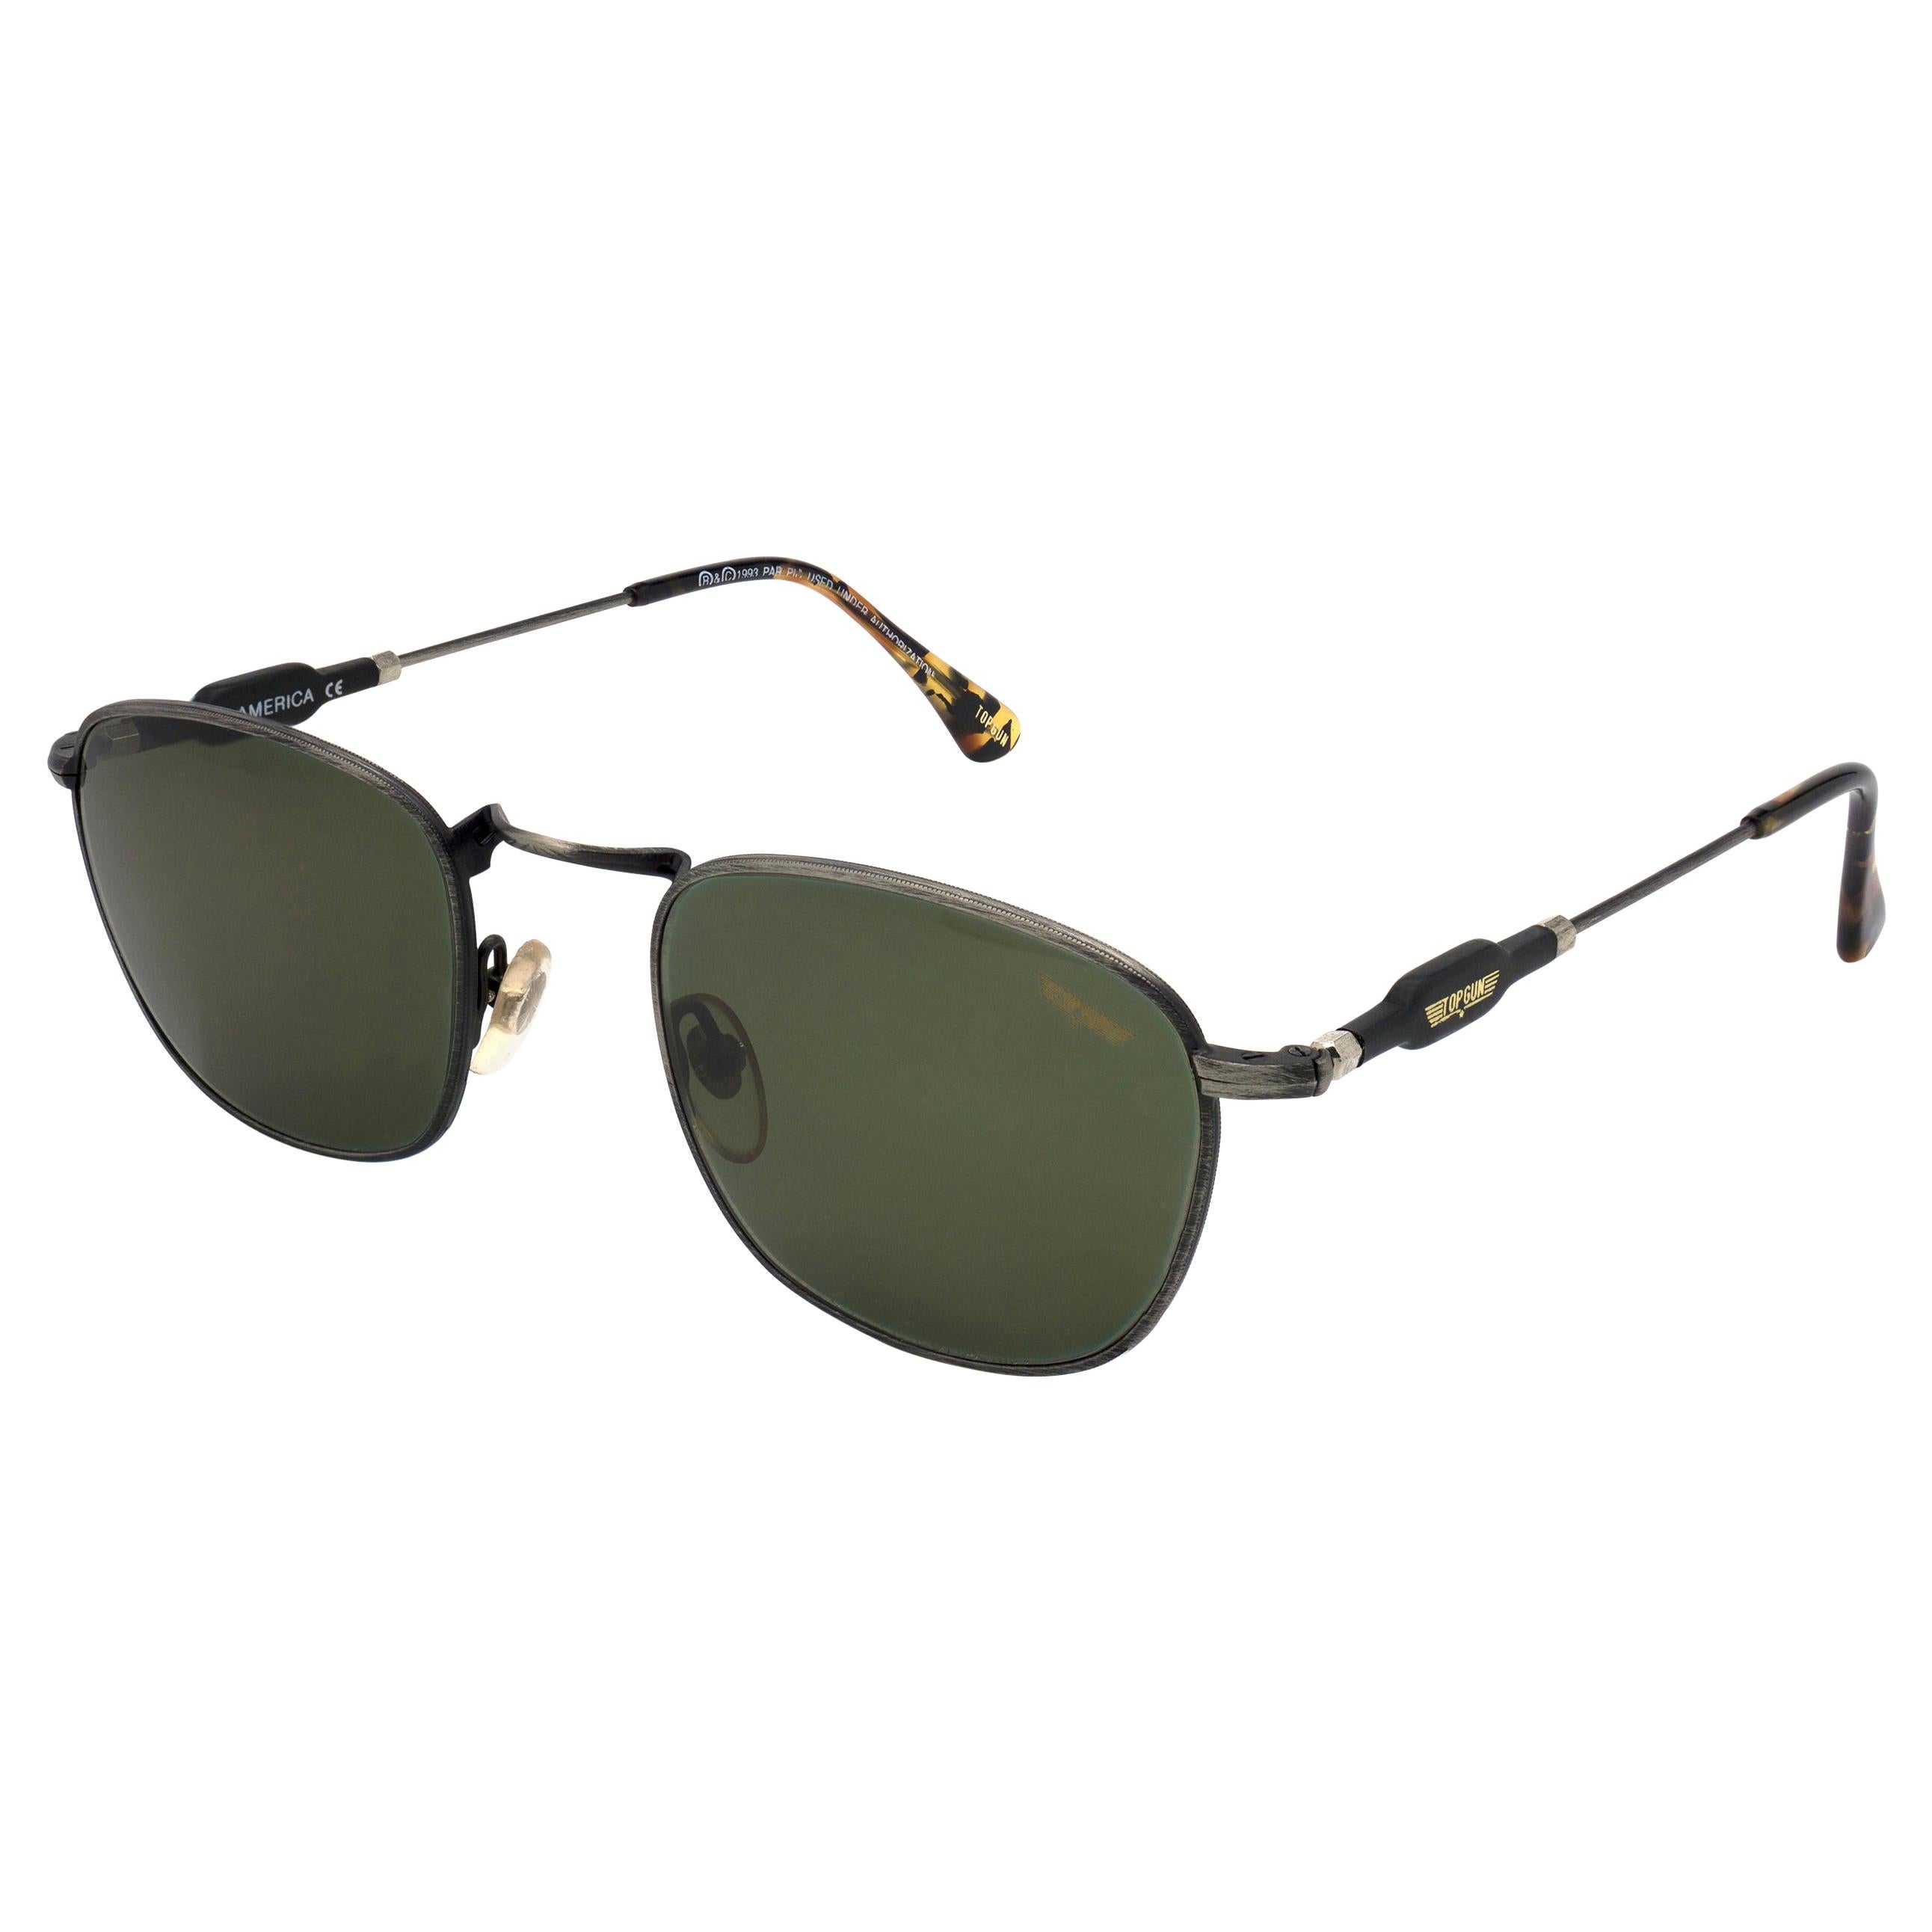 Top Gun square vintage sunglasses, Italy 90s For Sale